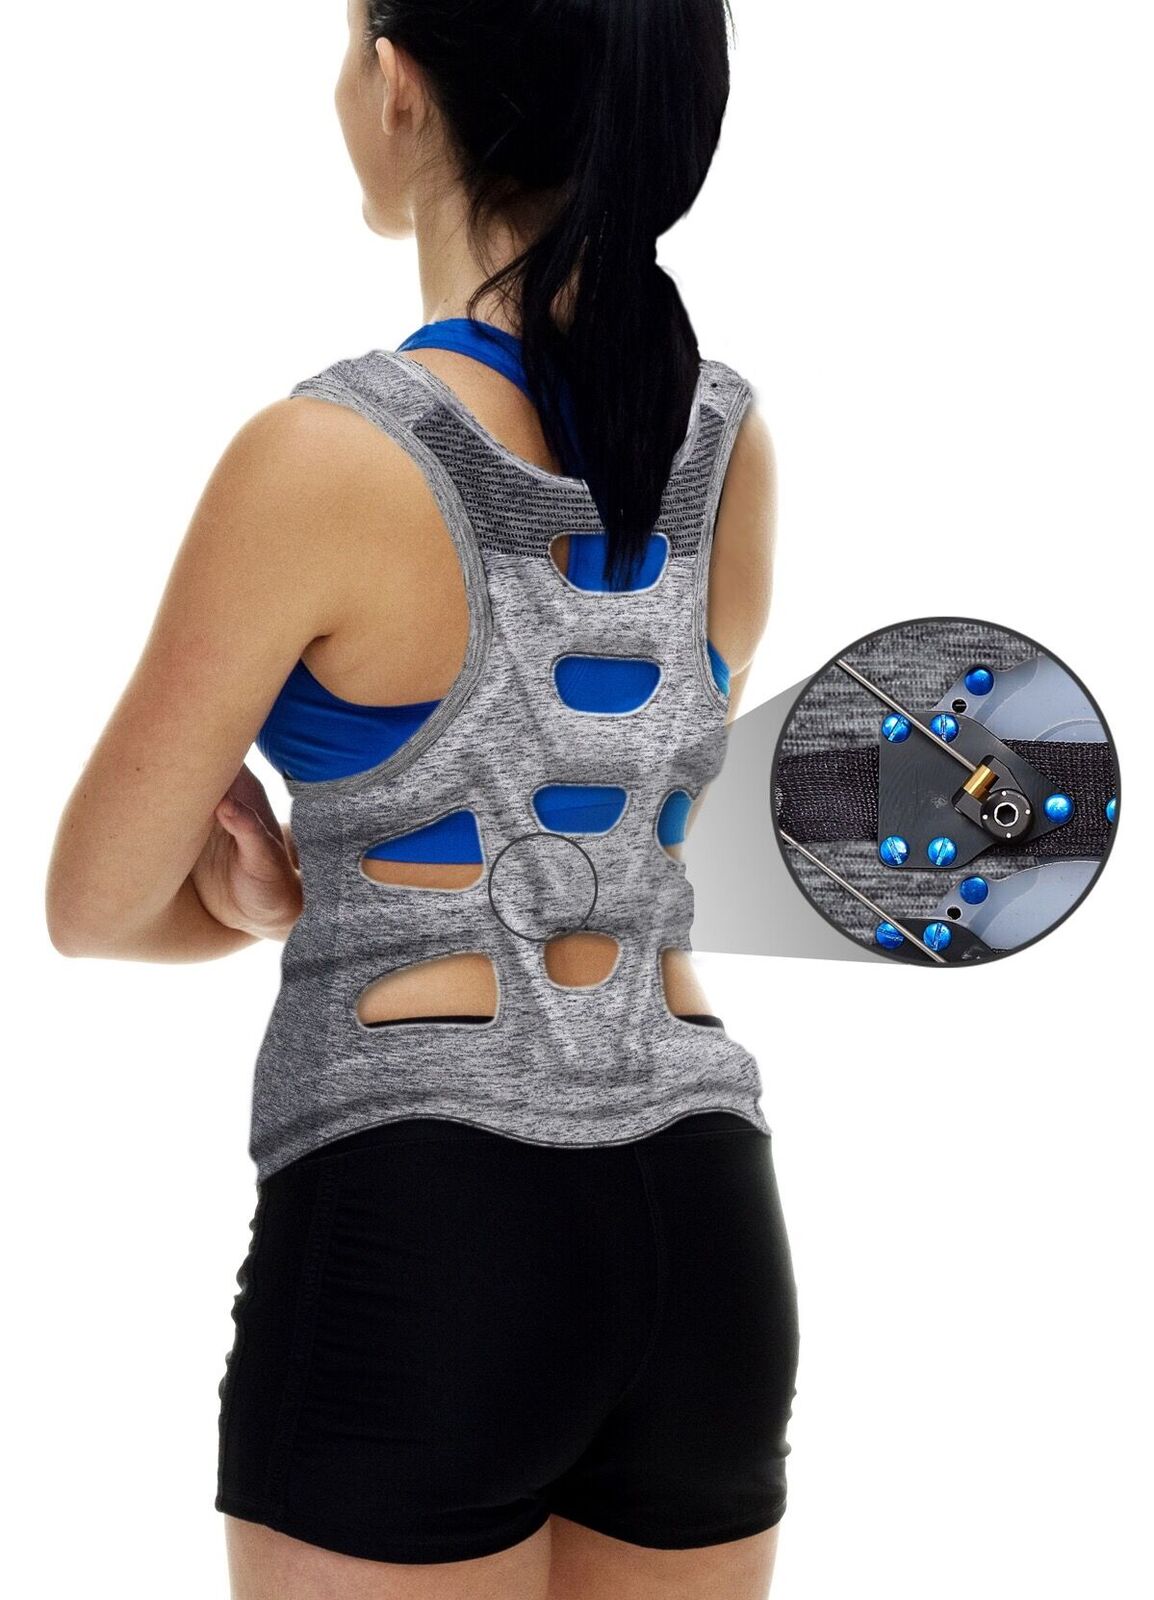 Scoliosis Brace Awarded $50,000 from FDA-Sponsored Competition